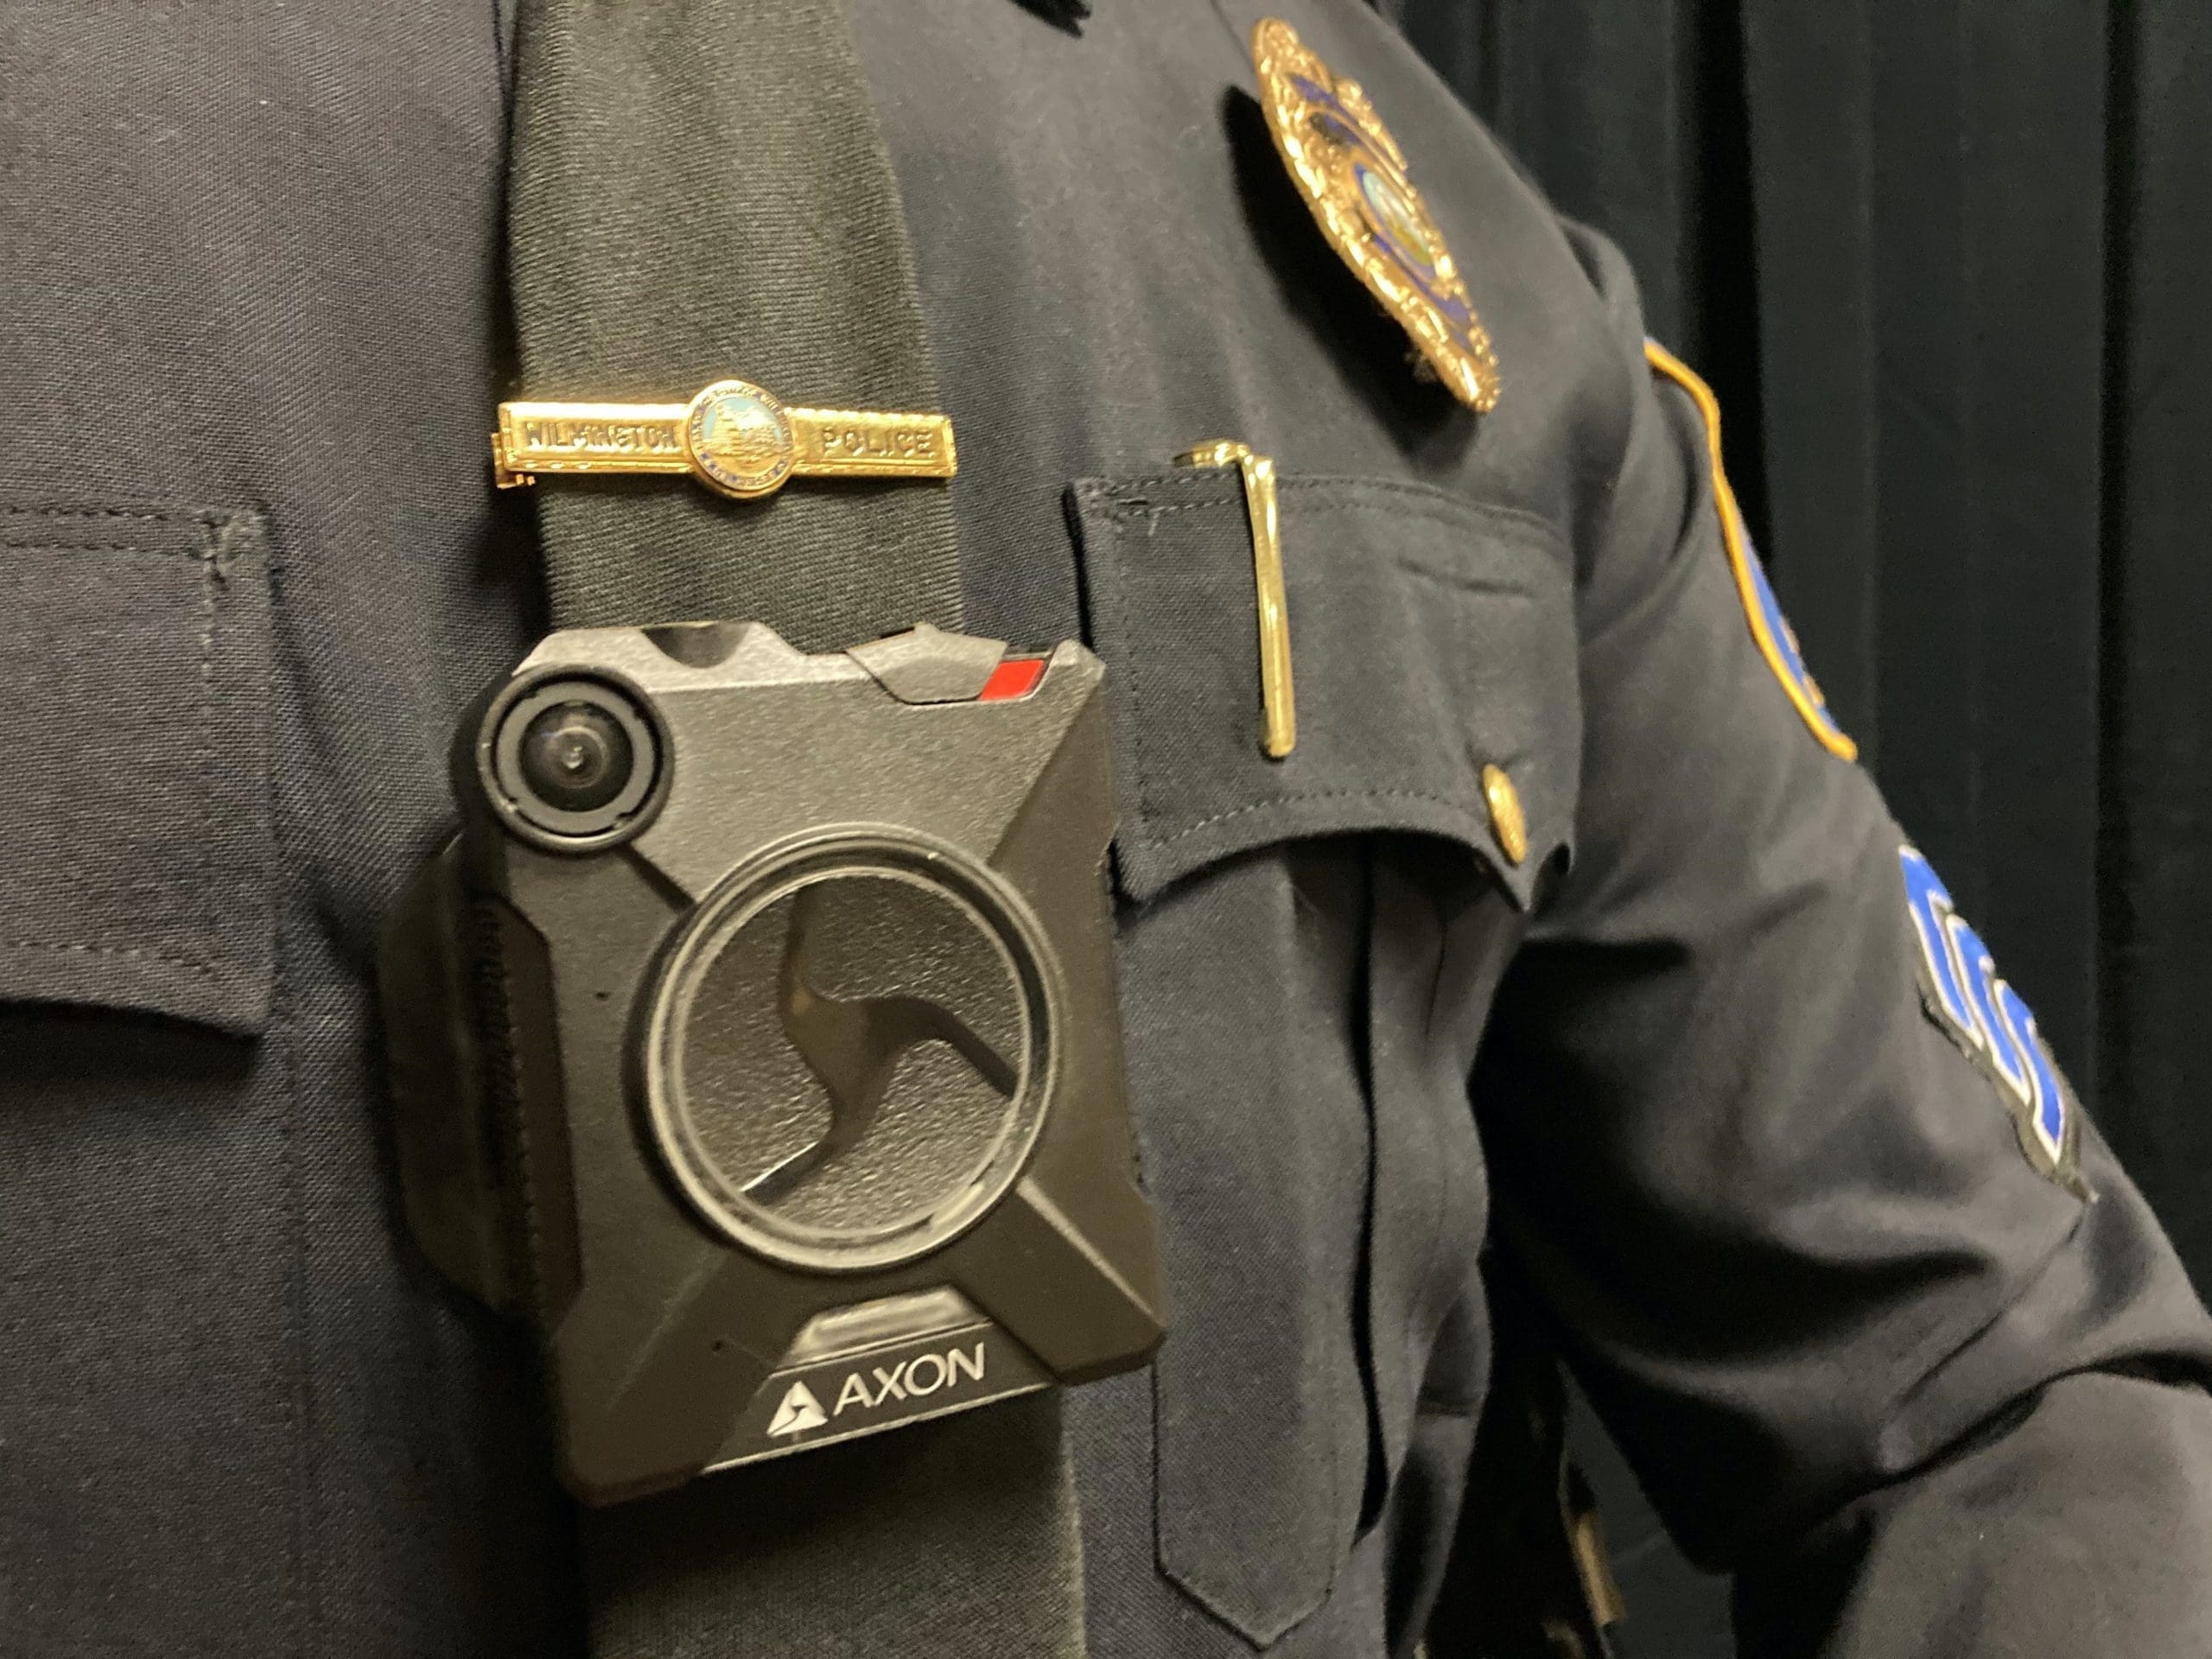 Featured image for “Body camera training underway in Wilmington as new bill calls for statewide policy”